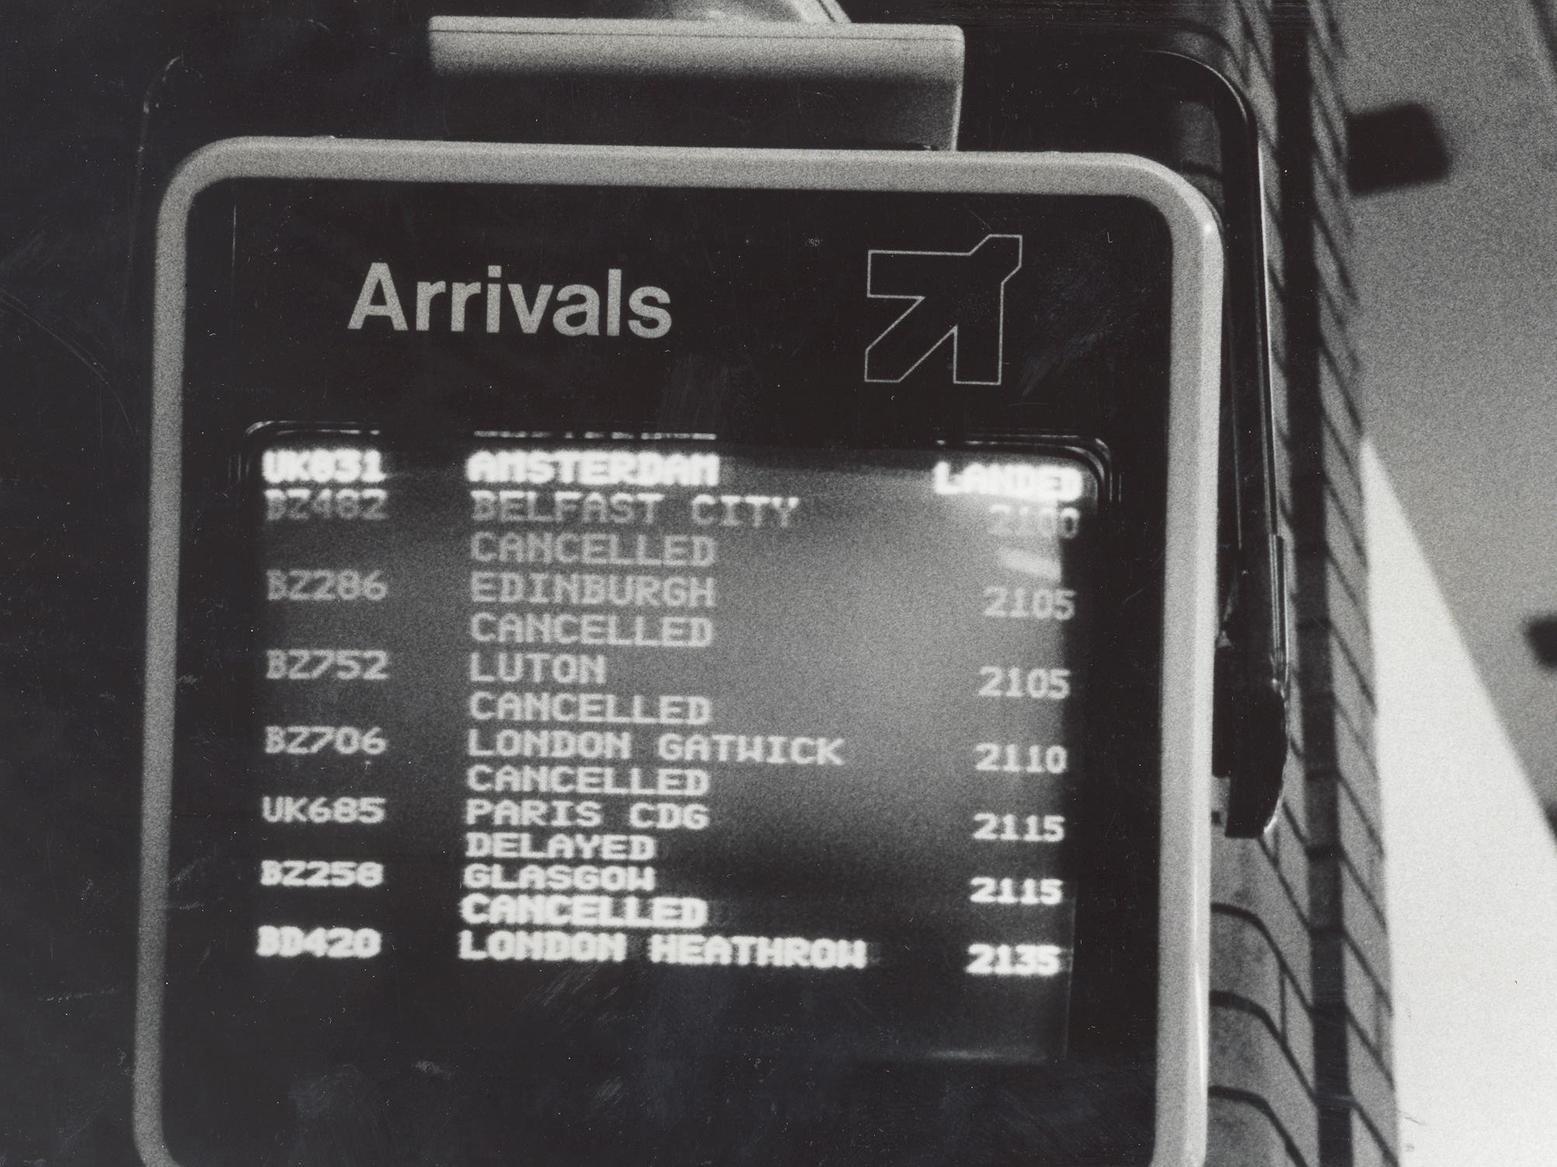 Bad news for travellers as the arrivals board shows cancellations of incoming Capital Airlines planes.